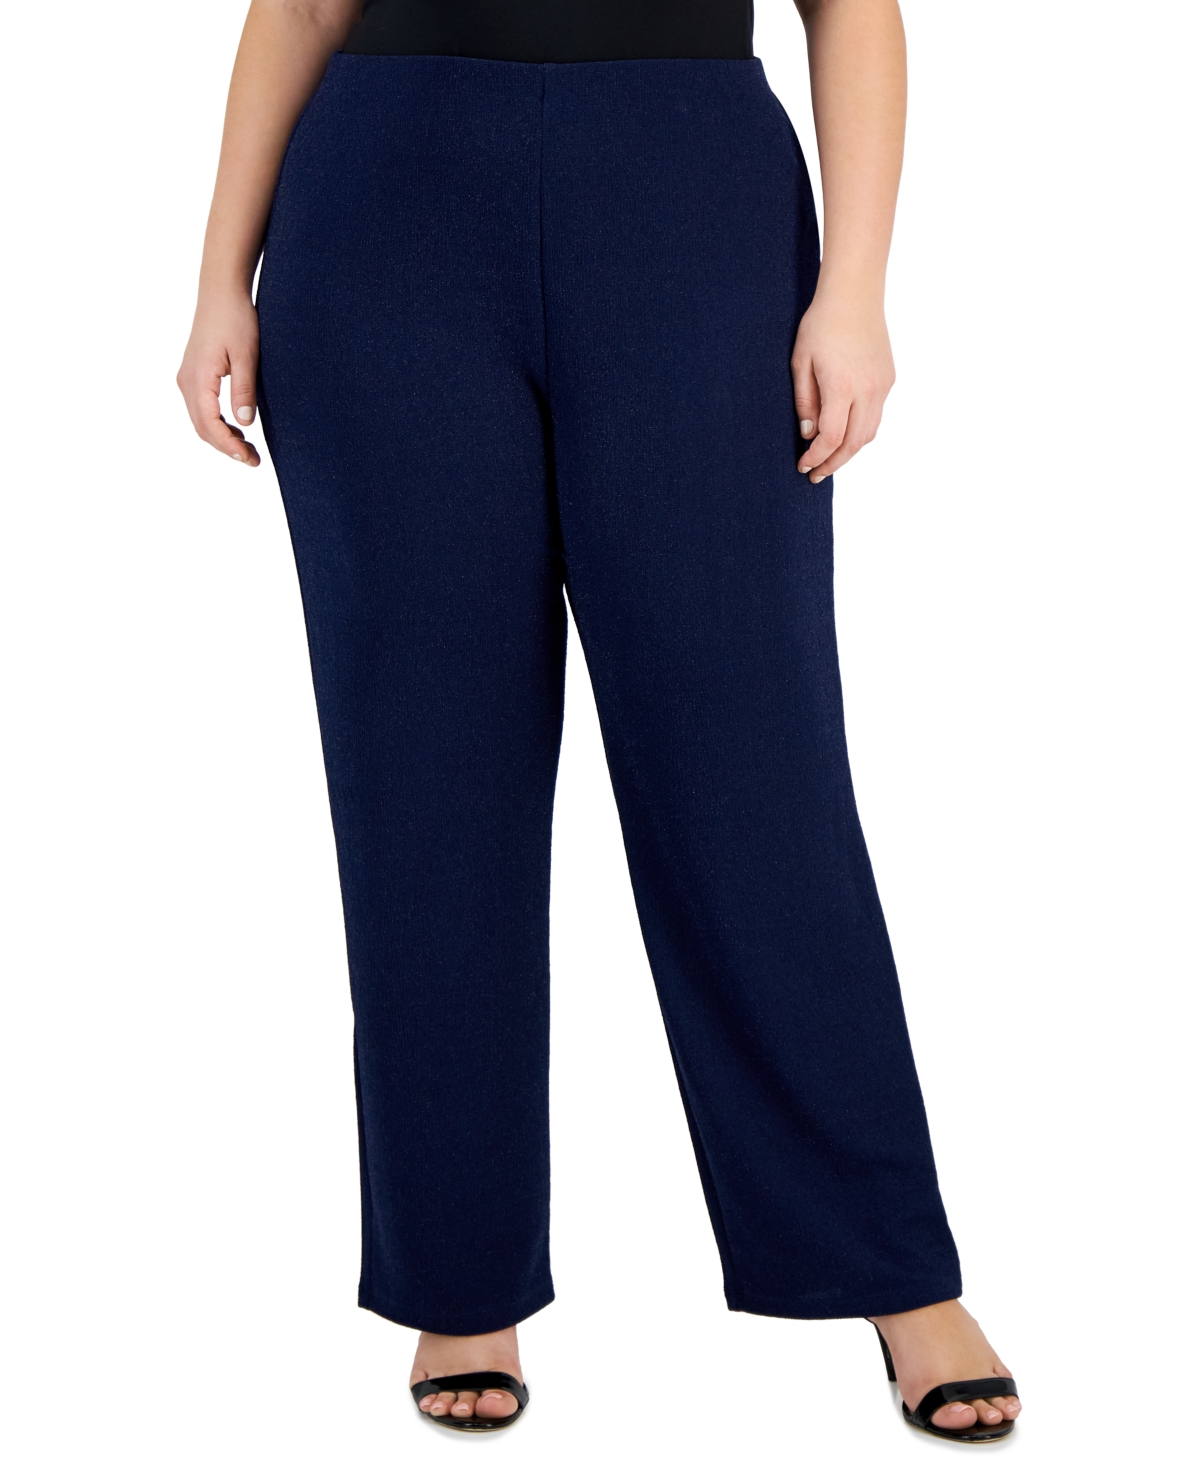 Jm Collection Plus Size New Shine Knit Dressing Pants, Created For Macy's In Intrepid Blue